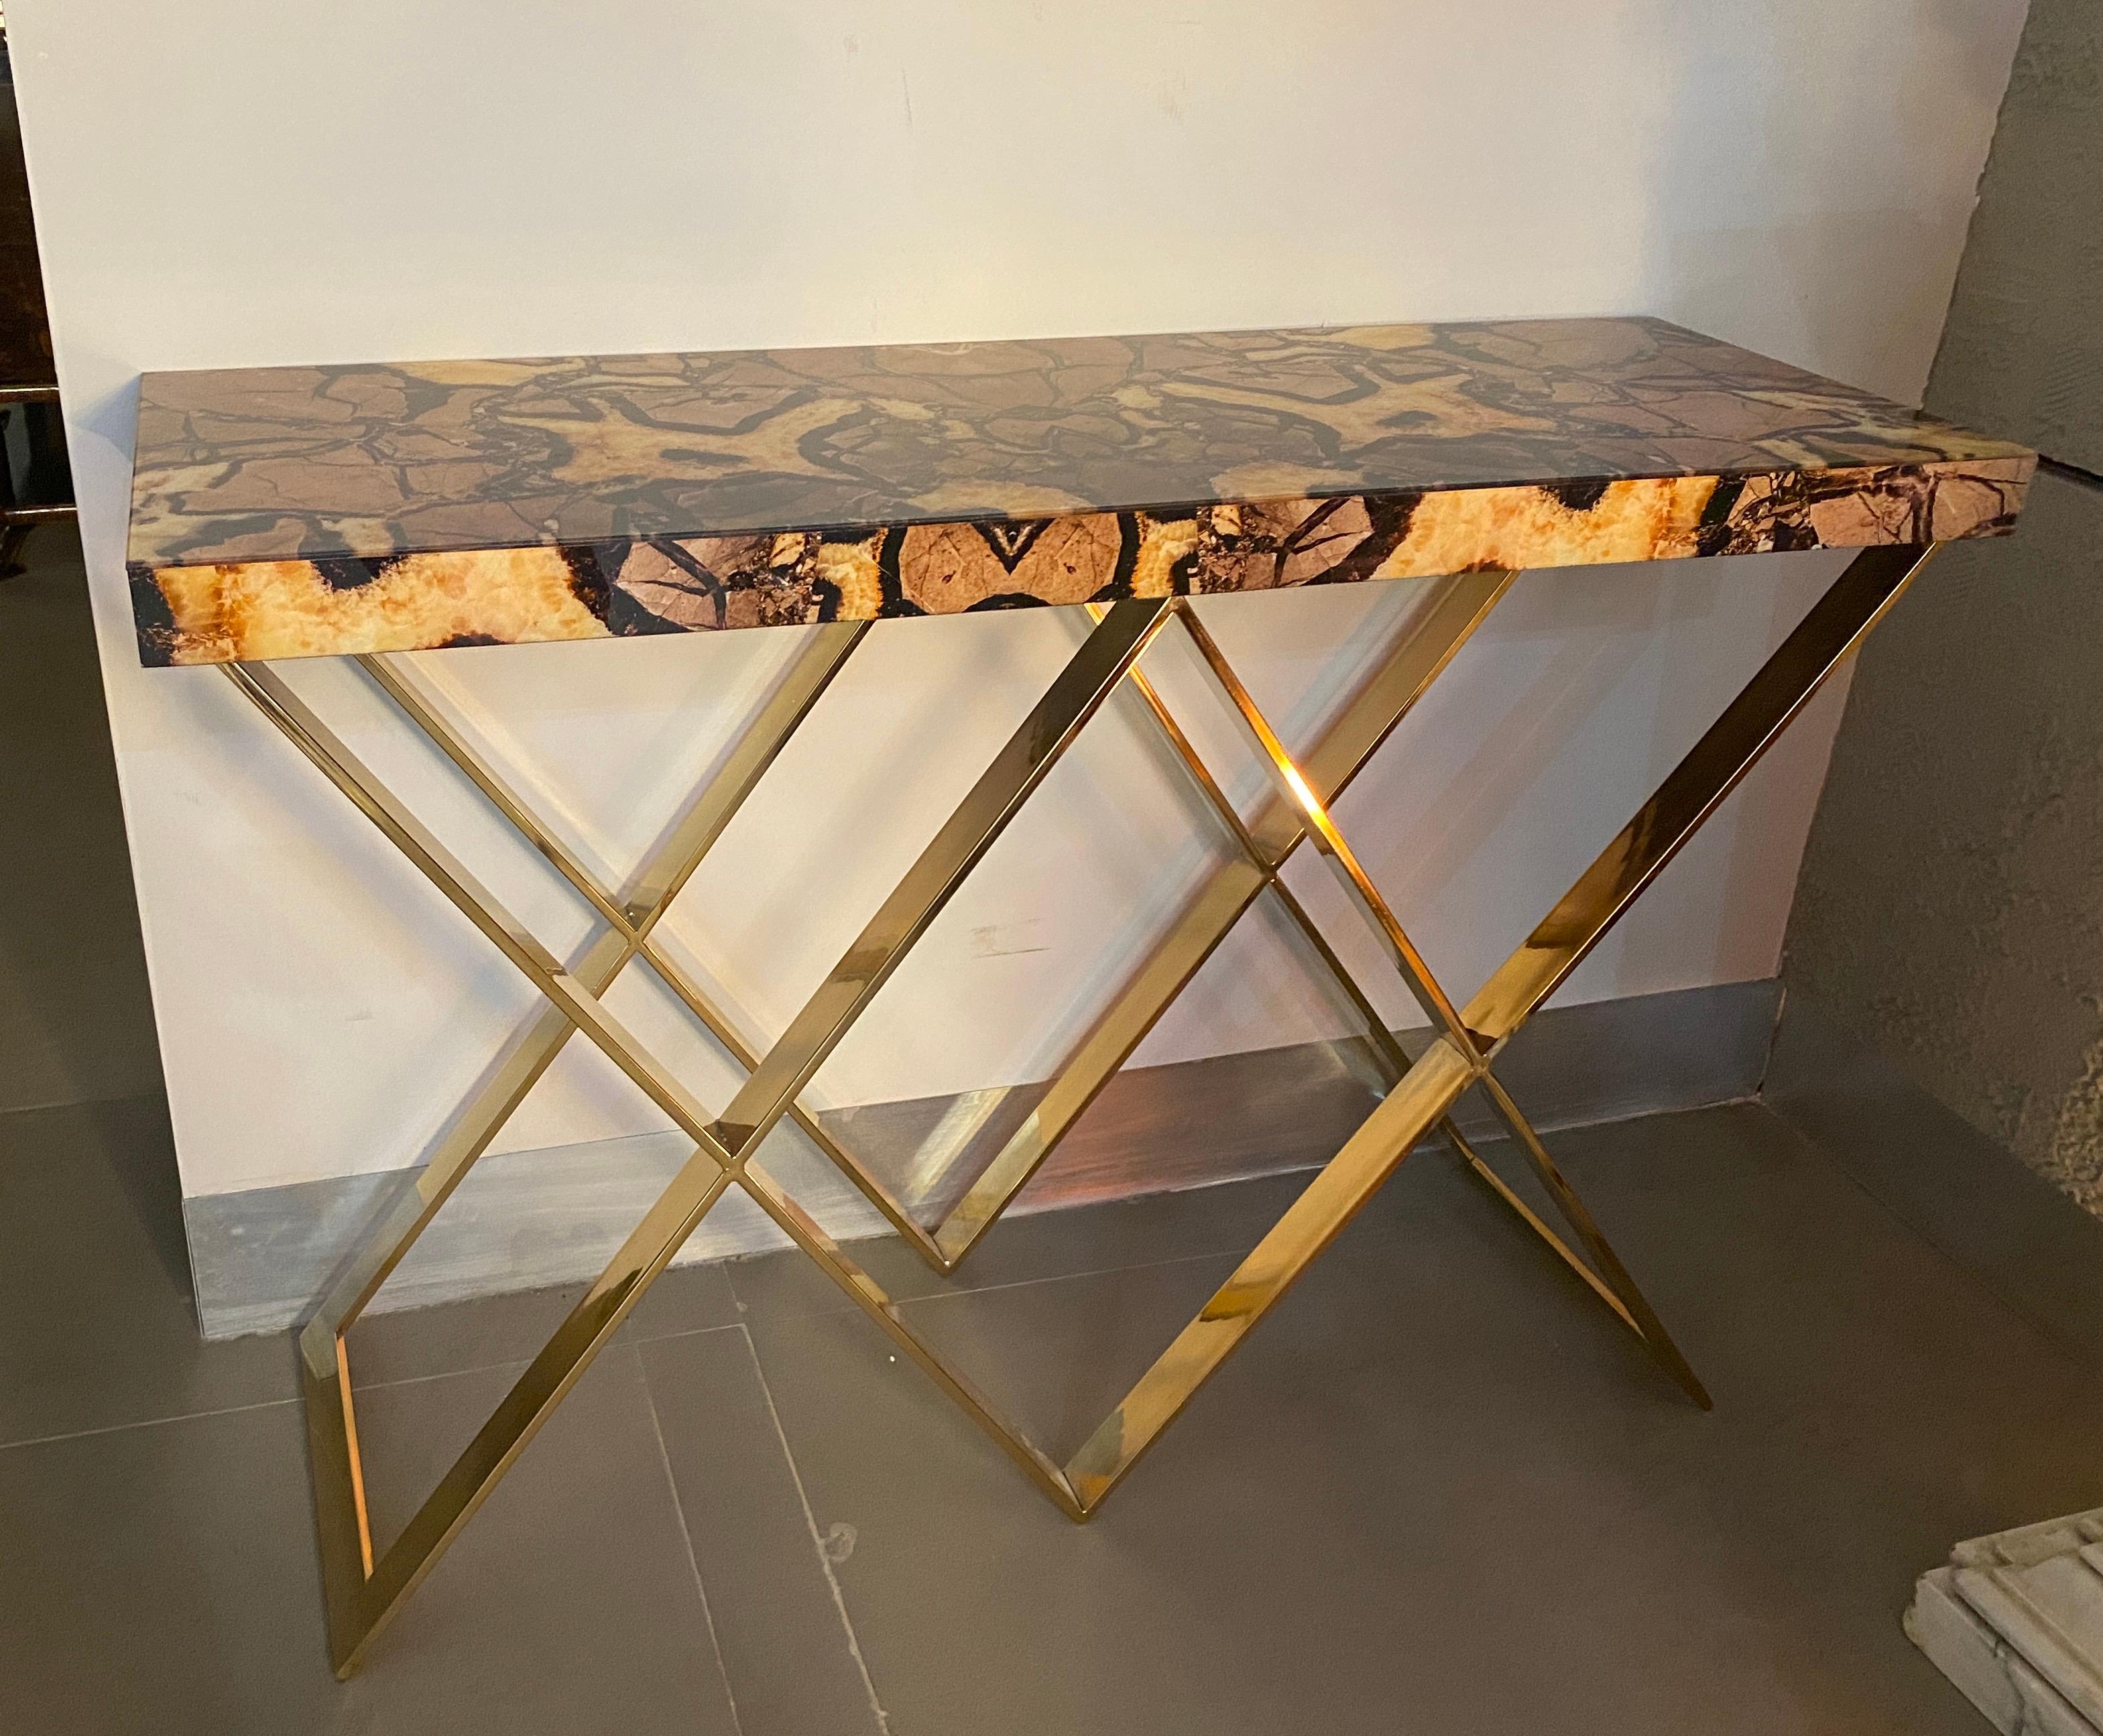 Exceptional console Tables with double X-shaped brass base .
The glass tops of these pair of consoles are made with the imitation of a semi-precious stone called “septaria”, which is formed by overlapping mineral deposits and is crossed by crystal